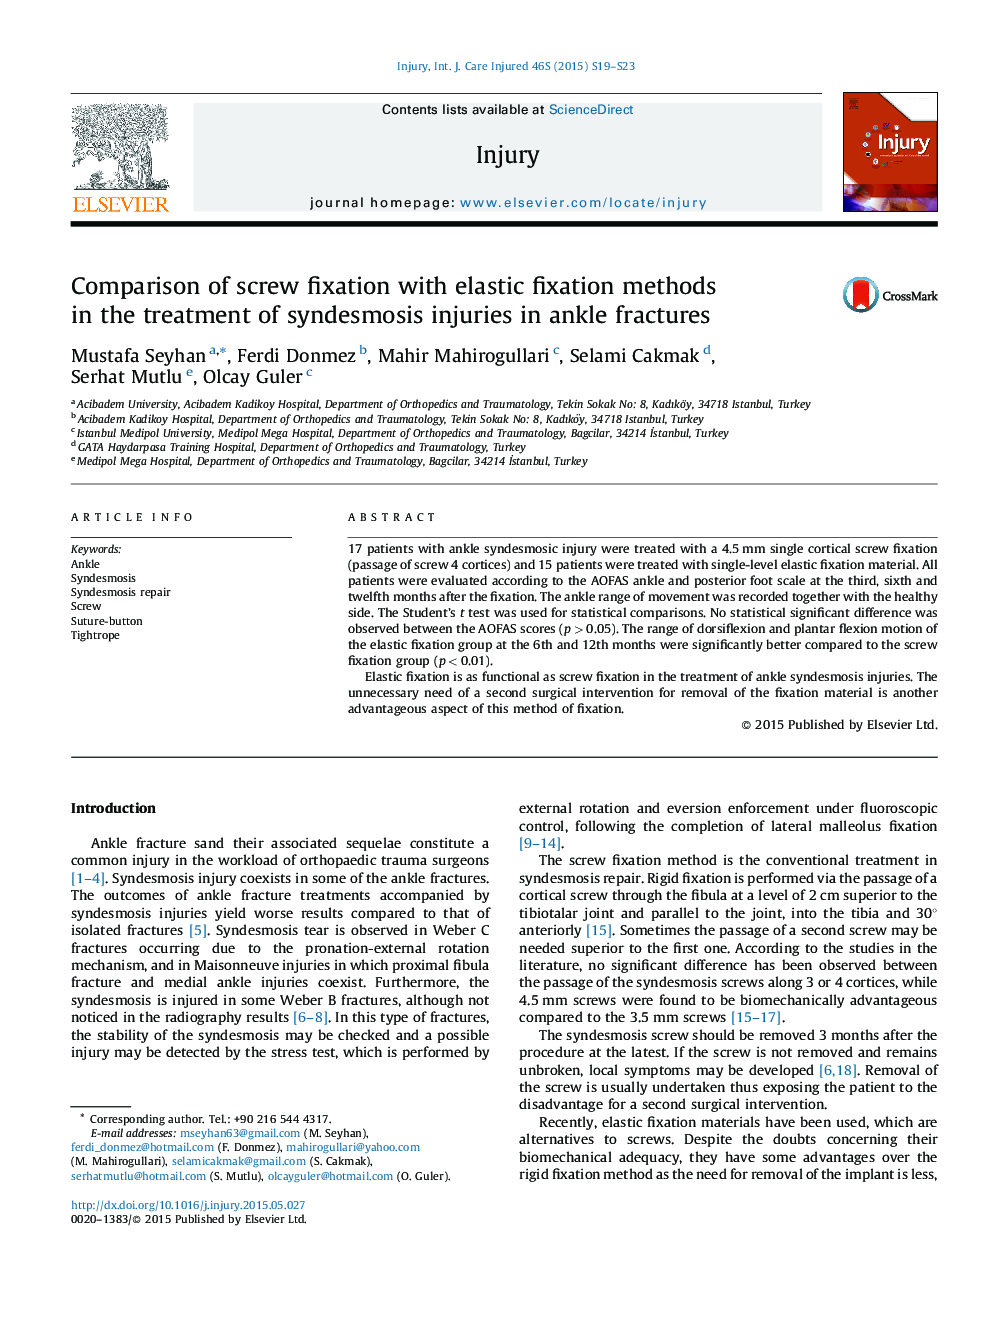 Comparison of screw fixation with elastic fixation methods in the treatment of syndesmosis injuries in ankle fractures